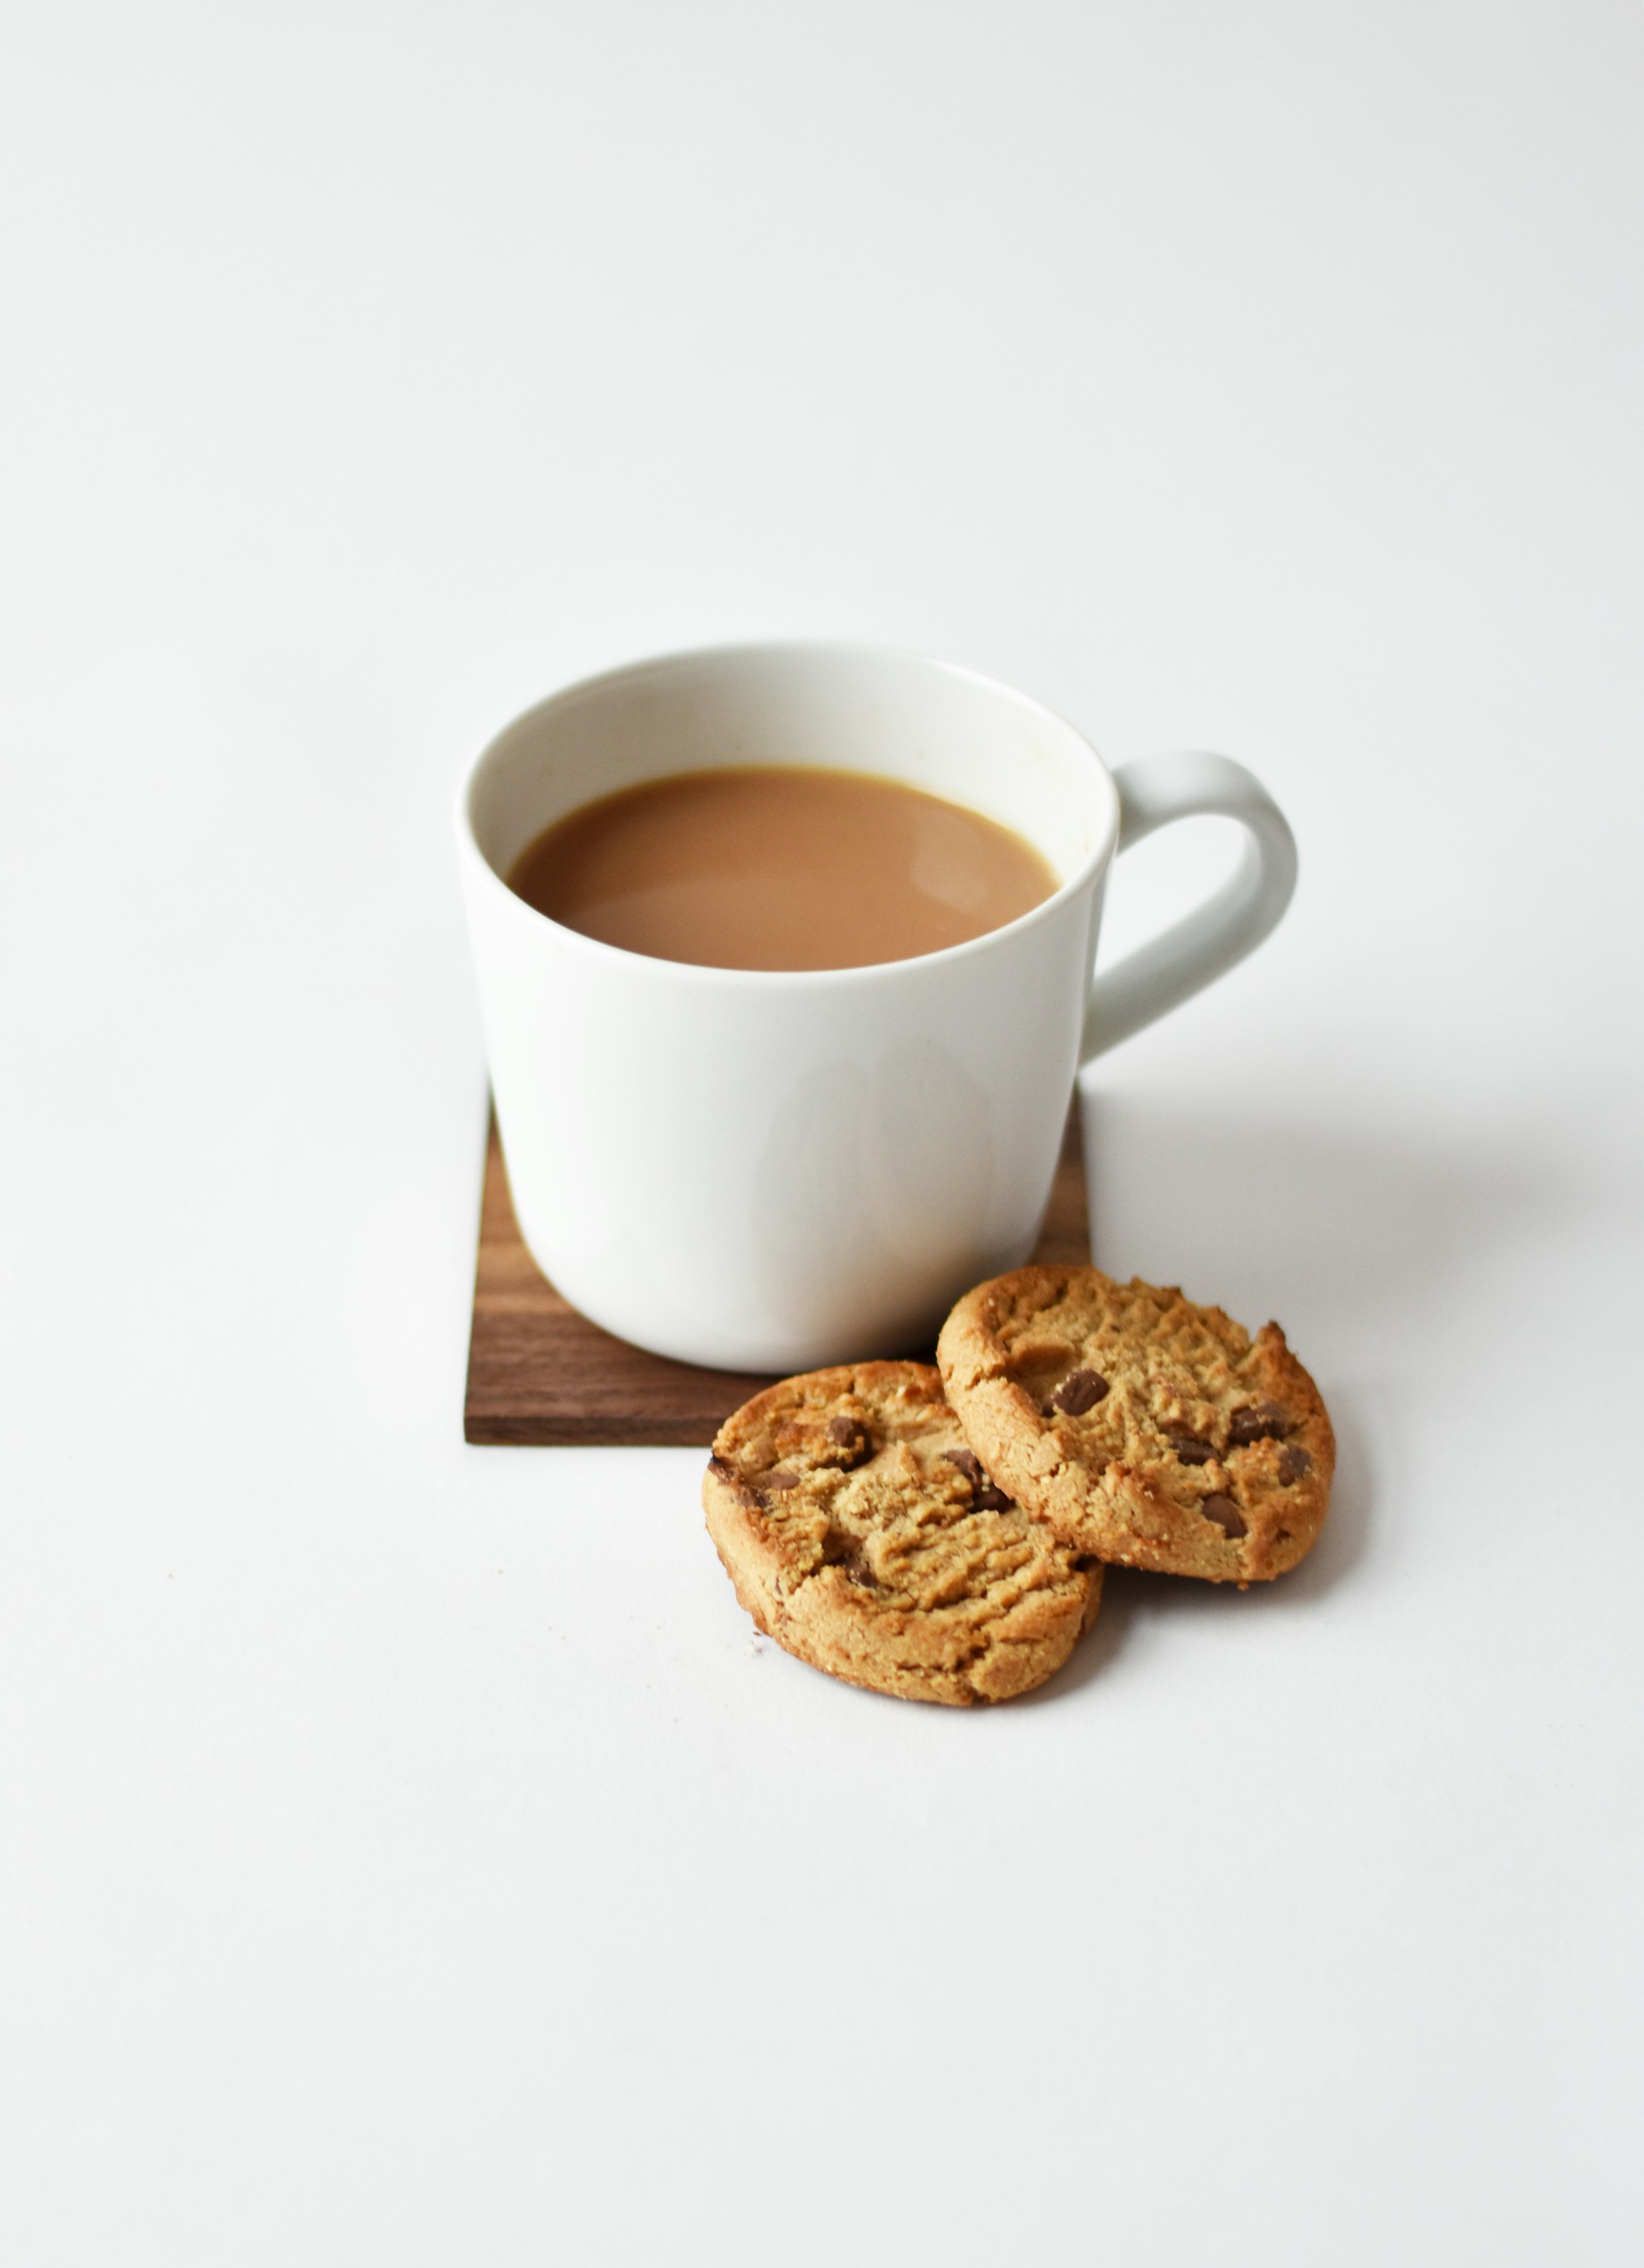 A cup of tea with biscuits | Source: Unsplash